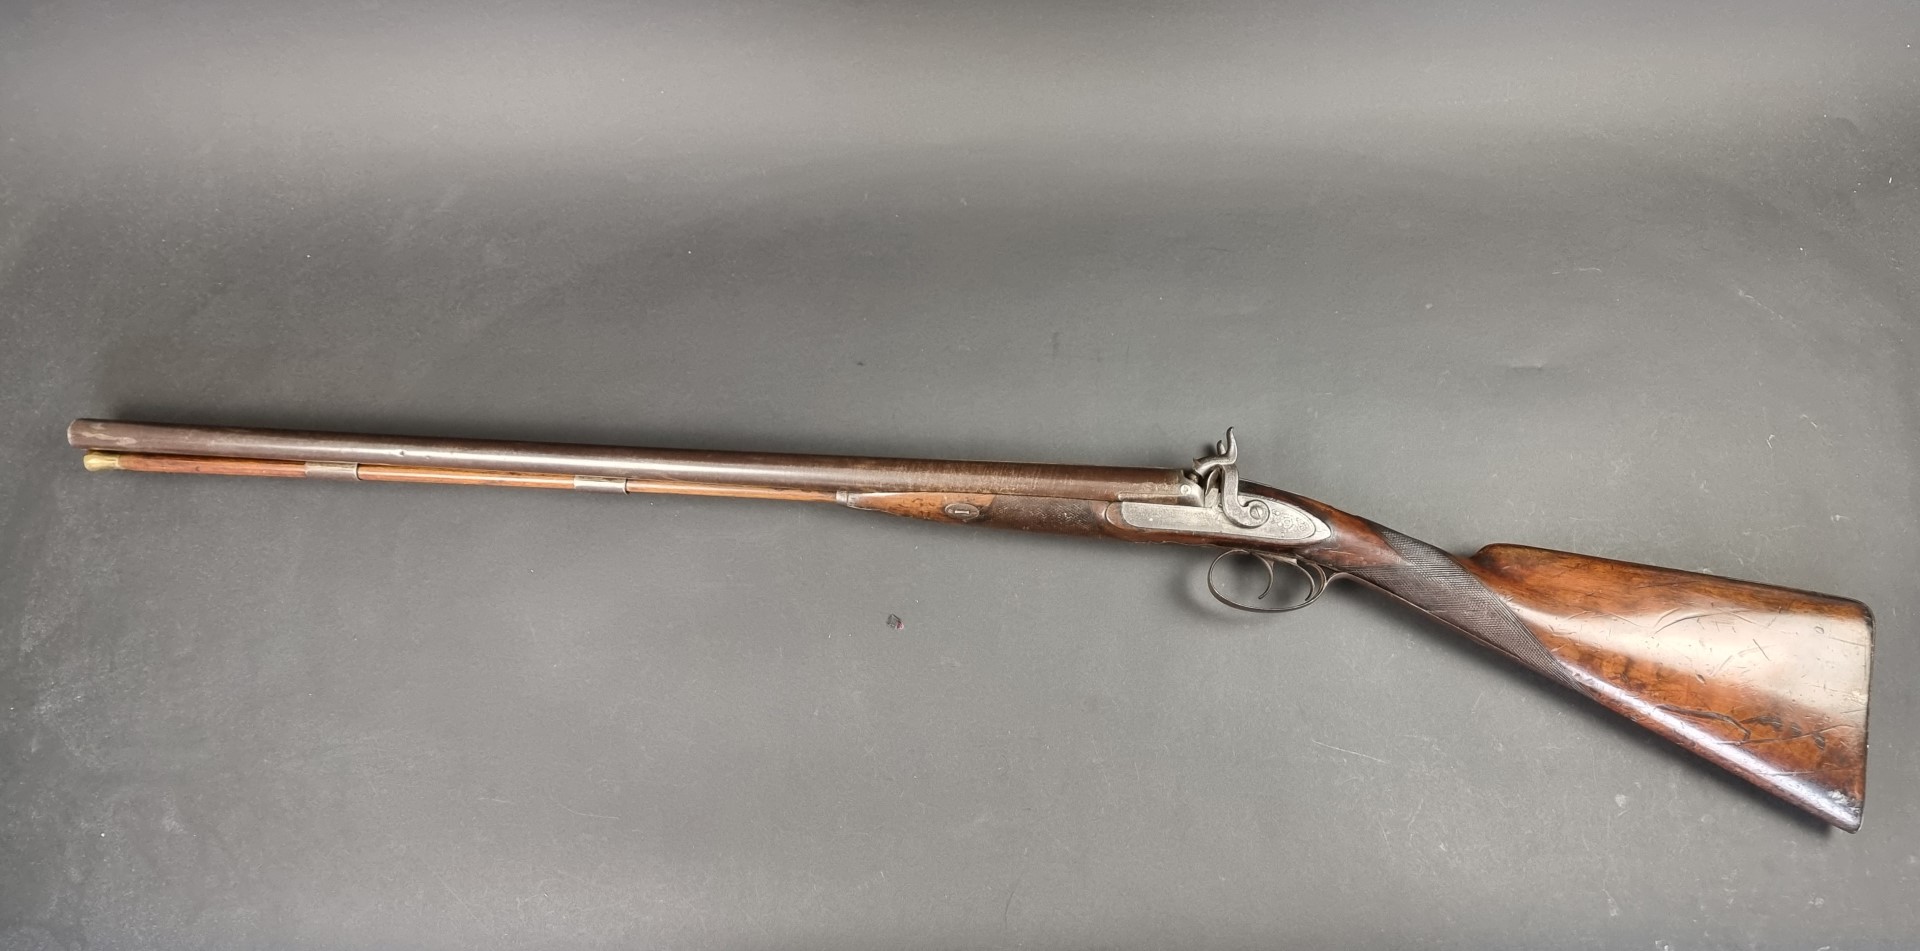 A Victorian double barrelled muzzle loading percussion shotgun, by Charles Osborne of London, having